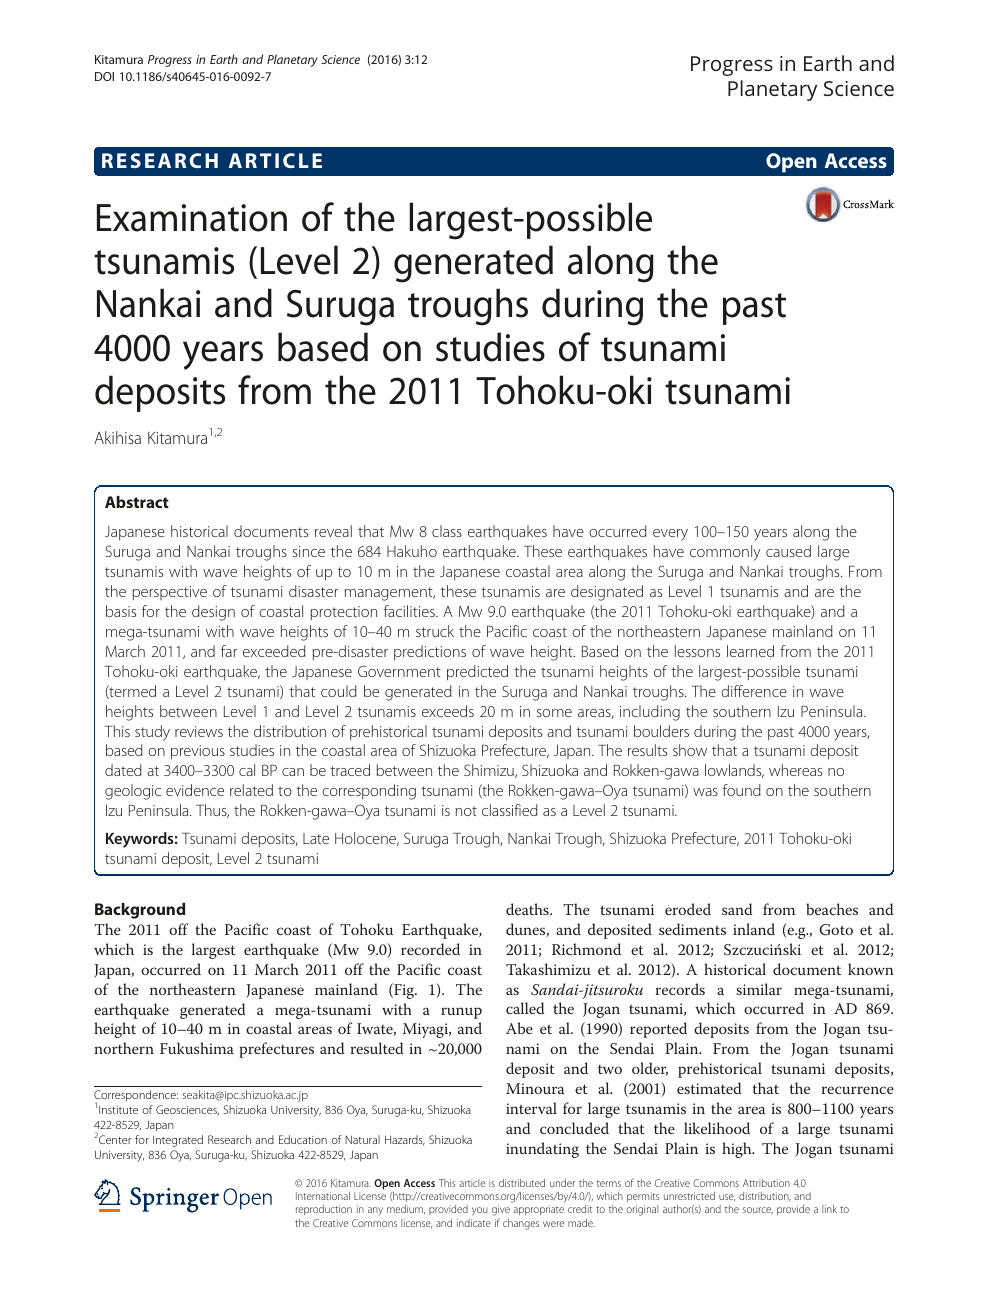 Examination Of The Largest Possible Tsunamis Level 2 Generated Along The Nankai And Suruga Troughs During The Past 4000 Years Based On Studies Of Tsunami Deposits From The 11 Tohoku Oki Tsunami Topic